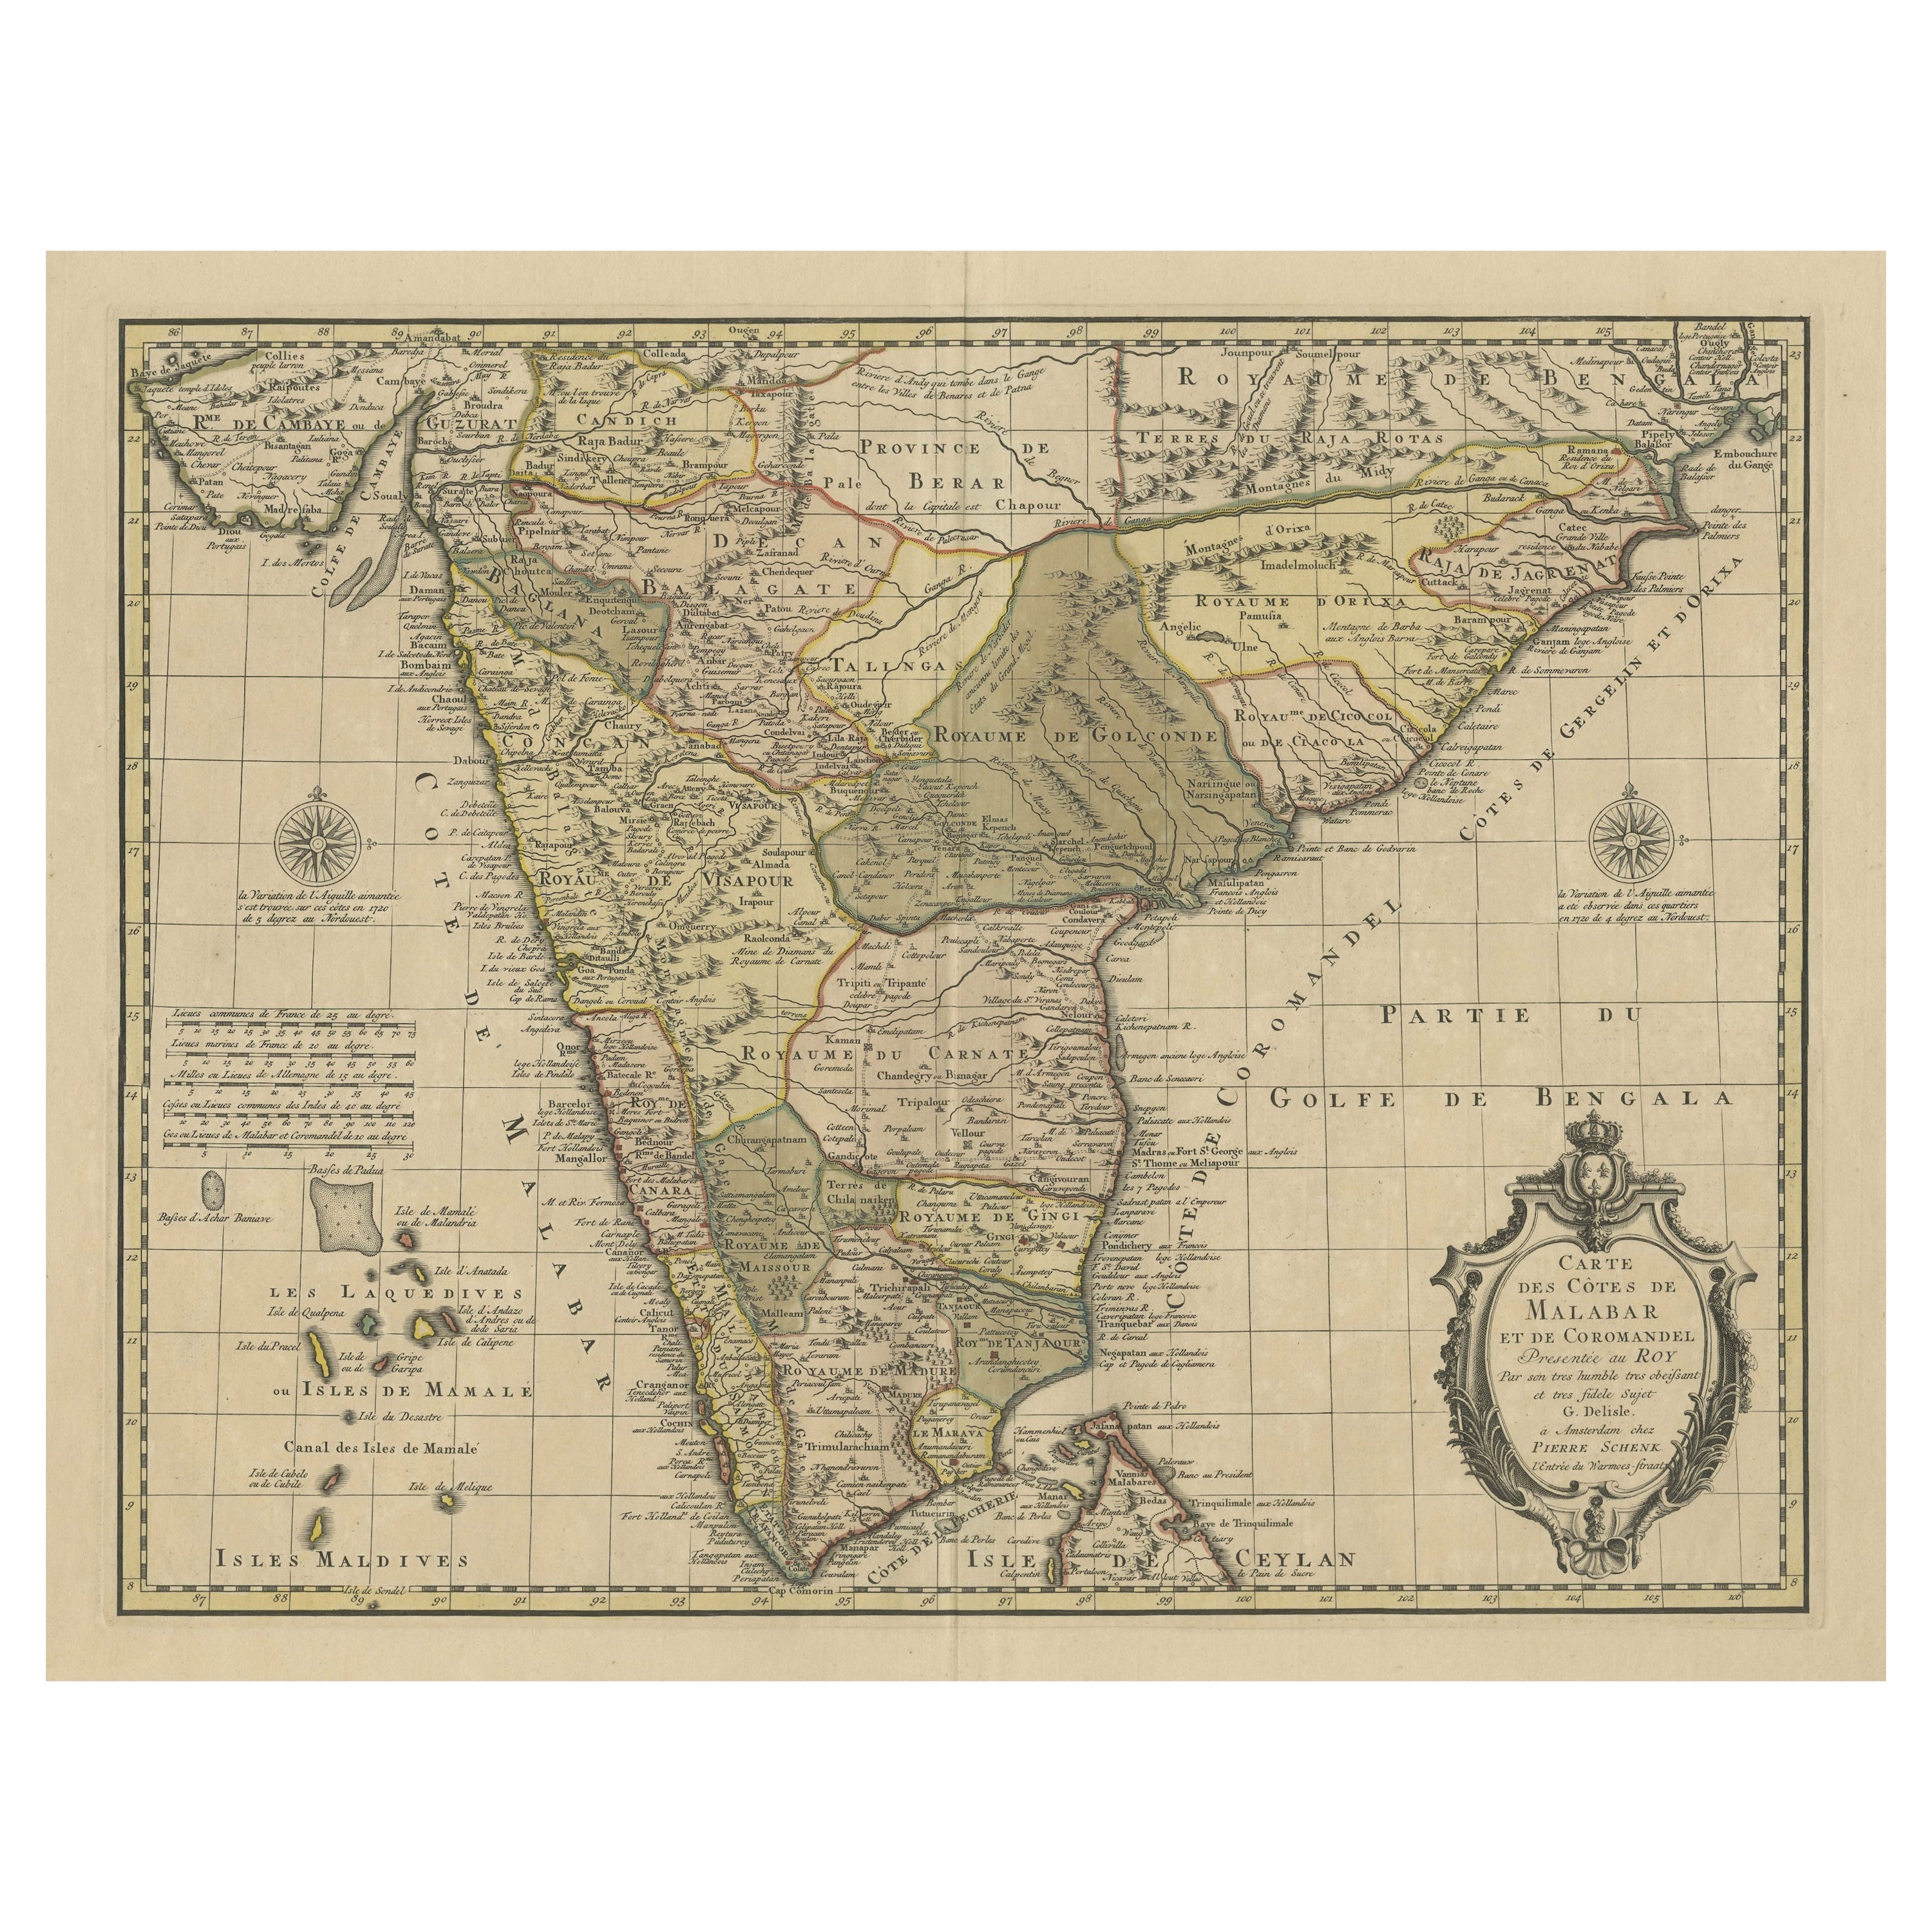 Detailed Decorative Antique Map of the Coast of Malabar and Coromandel, India